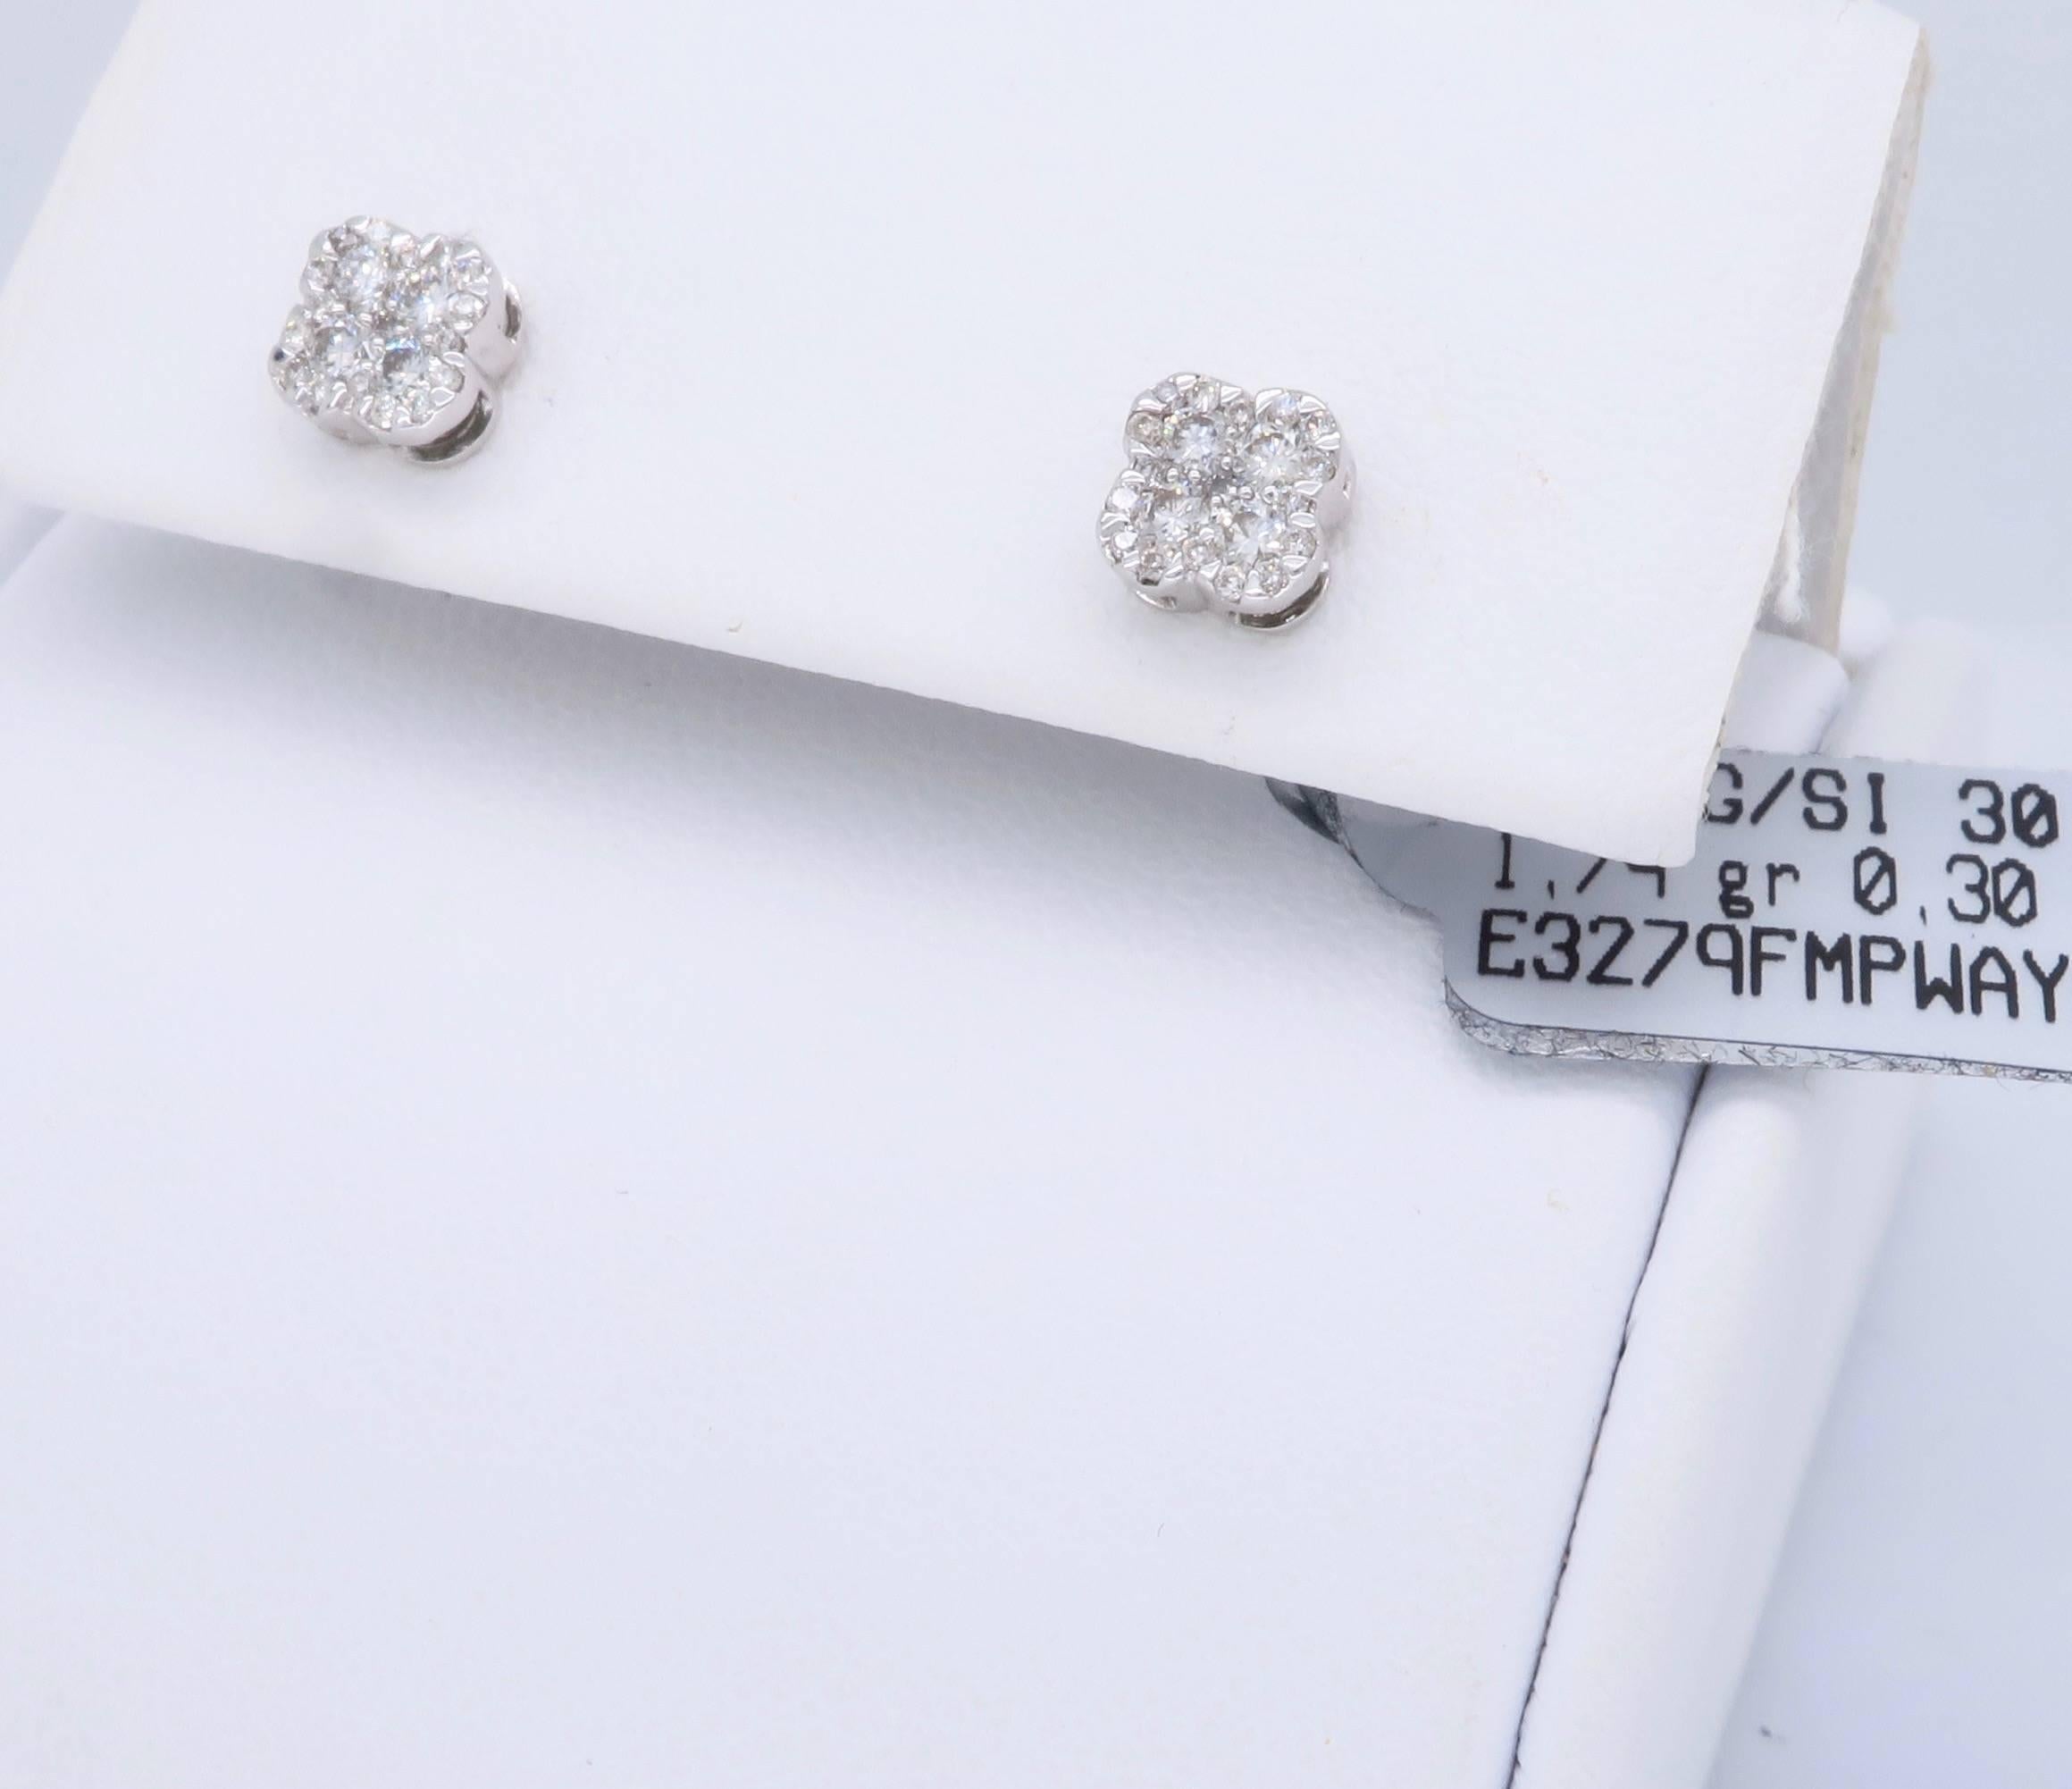 Pair of studs with .30CTW of Round Brilliant Cut Diamonds set into an elegant clover shape. The diamonds have G color and SI clarity. These New 14K white gold earrings weigh 1.4 grams.